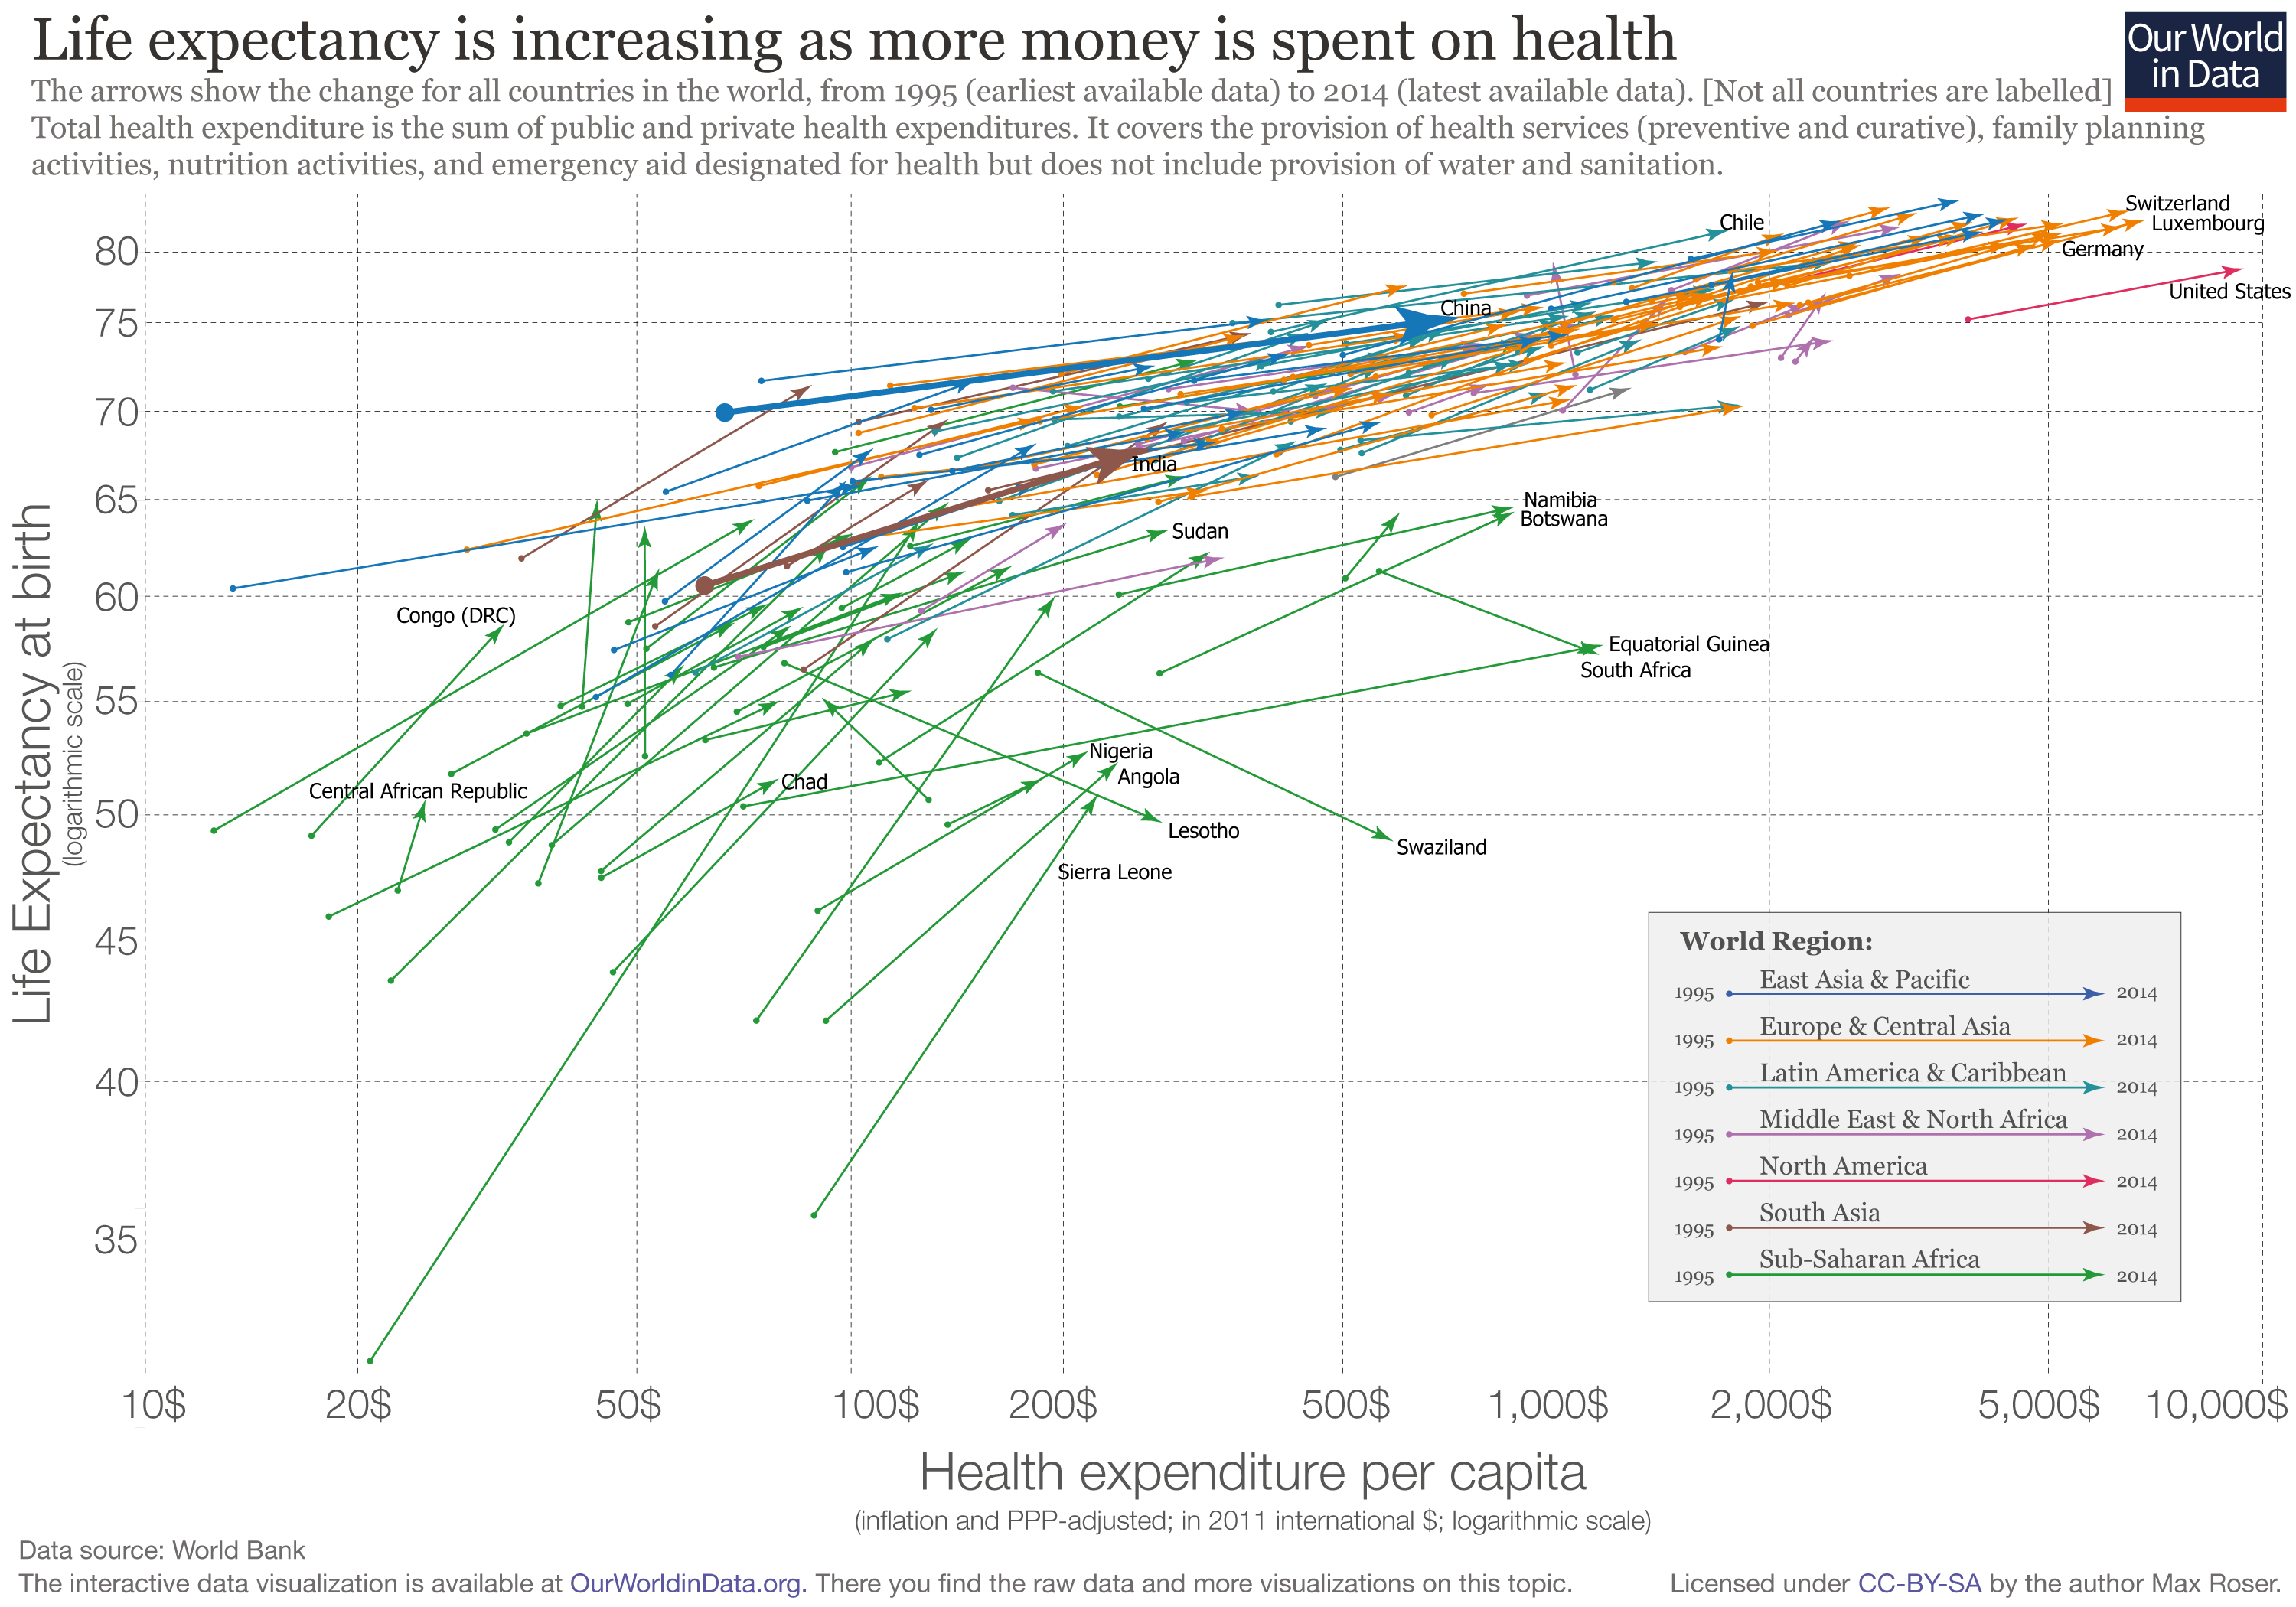 How does life expectancy in the United States compare to the rest of the world?